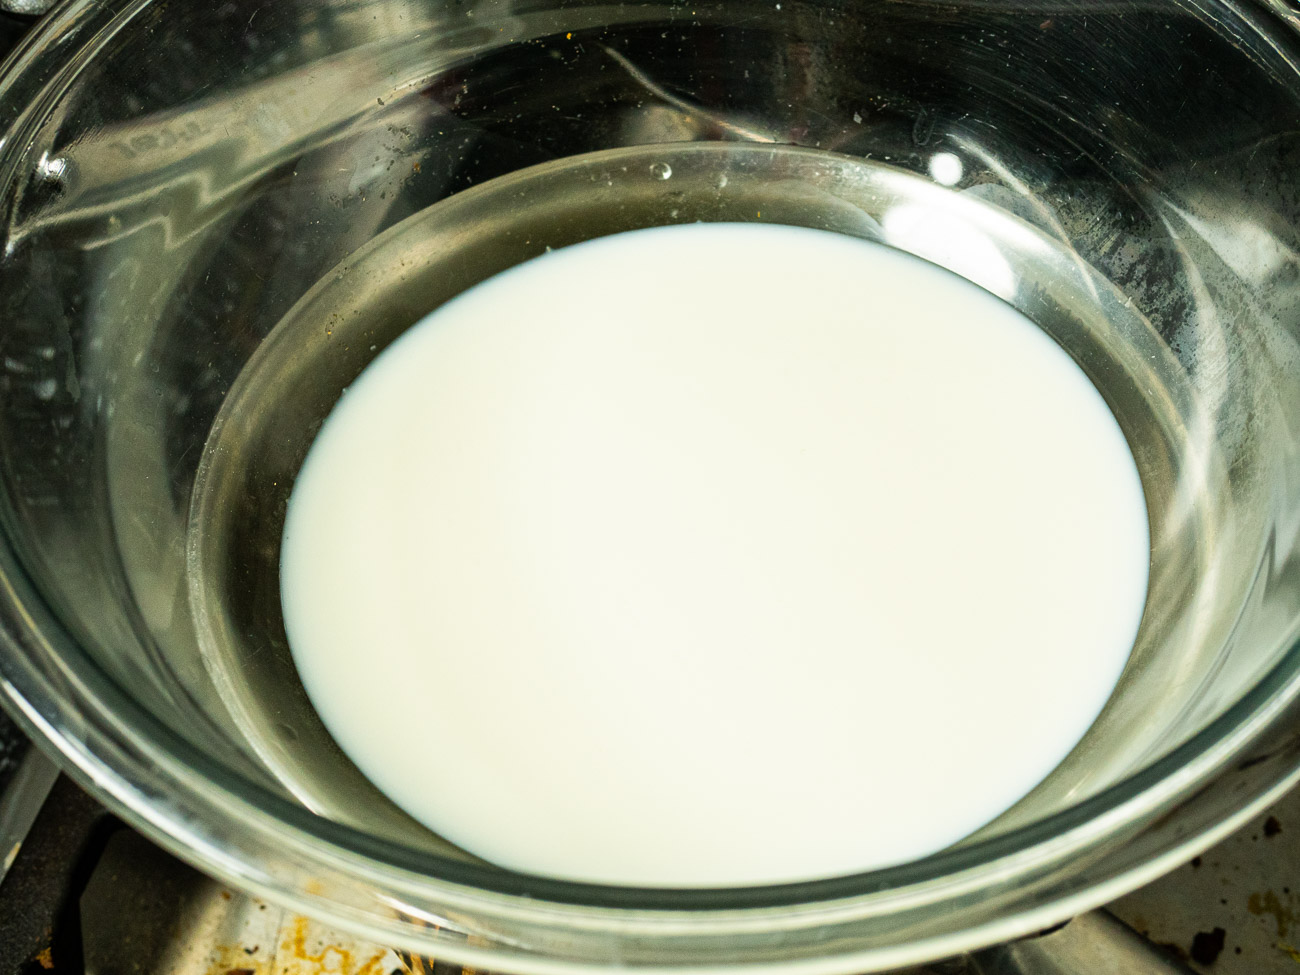 Using a double boiler heat 1 cup milk over medium-low heat until just beginning to froth.